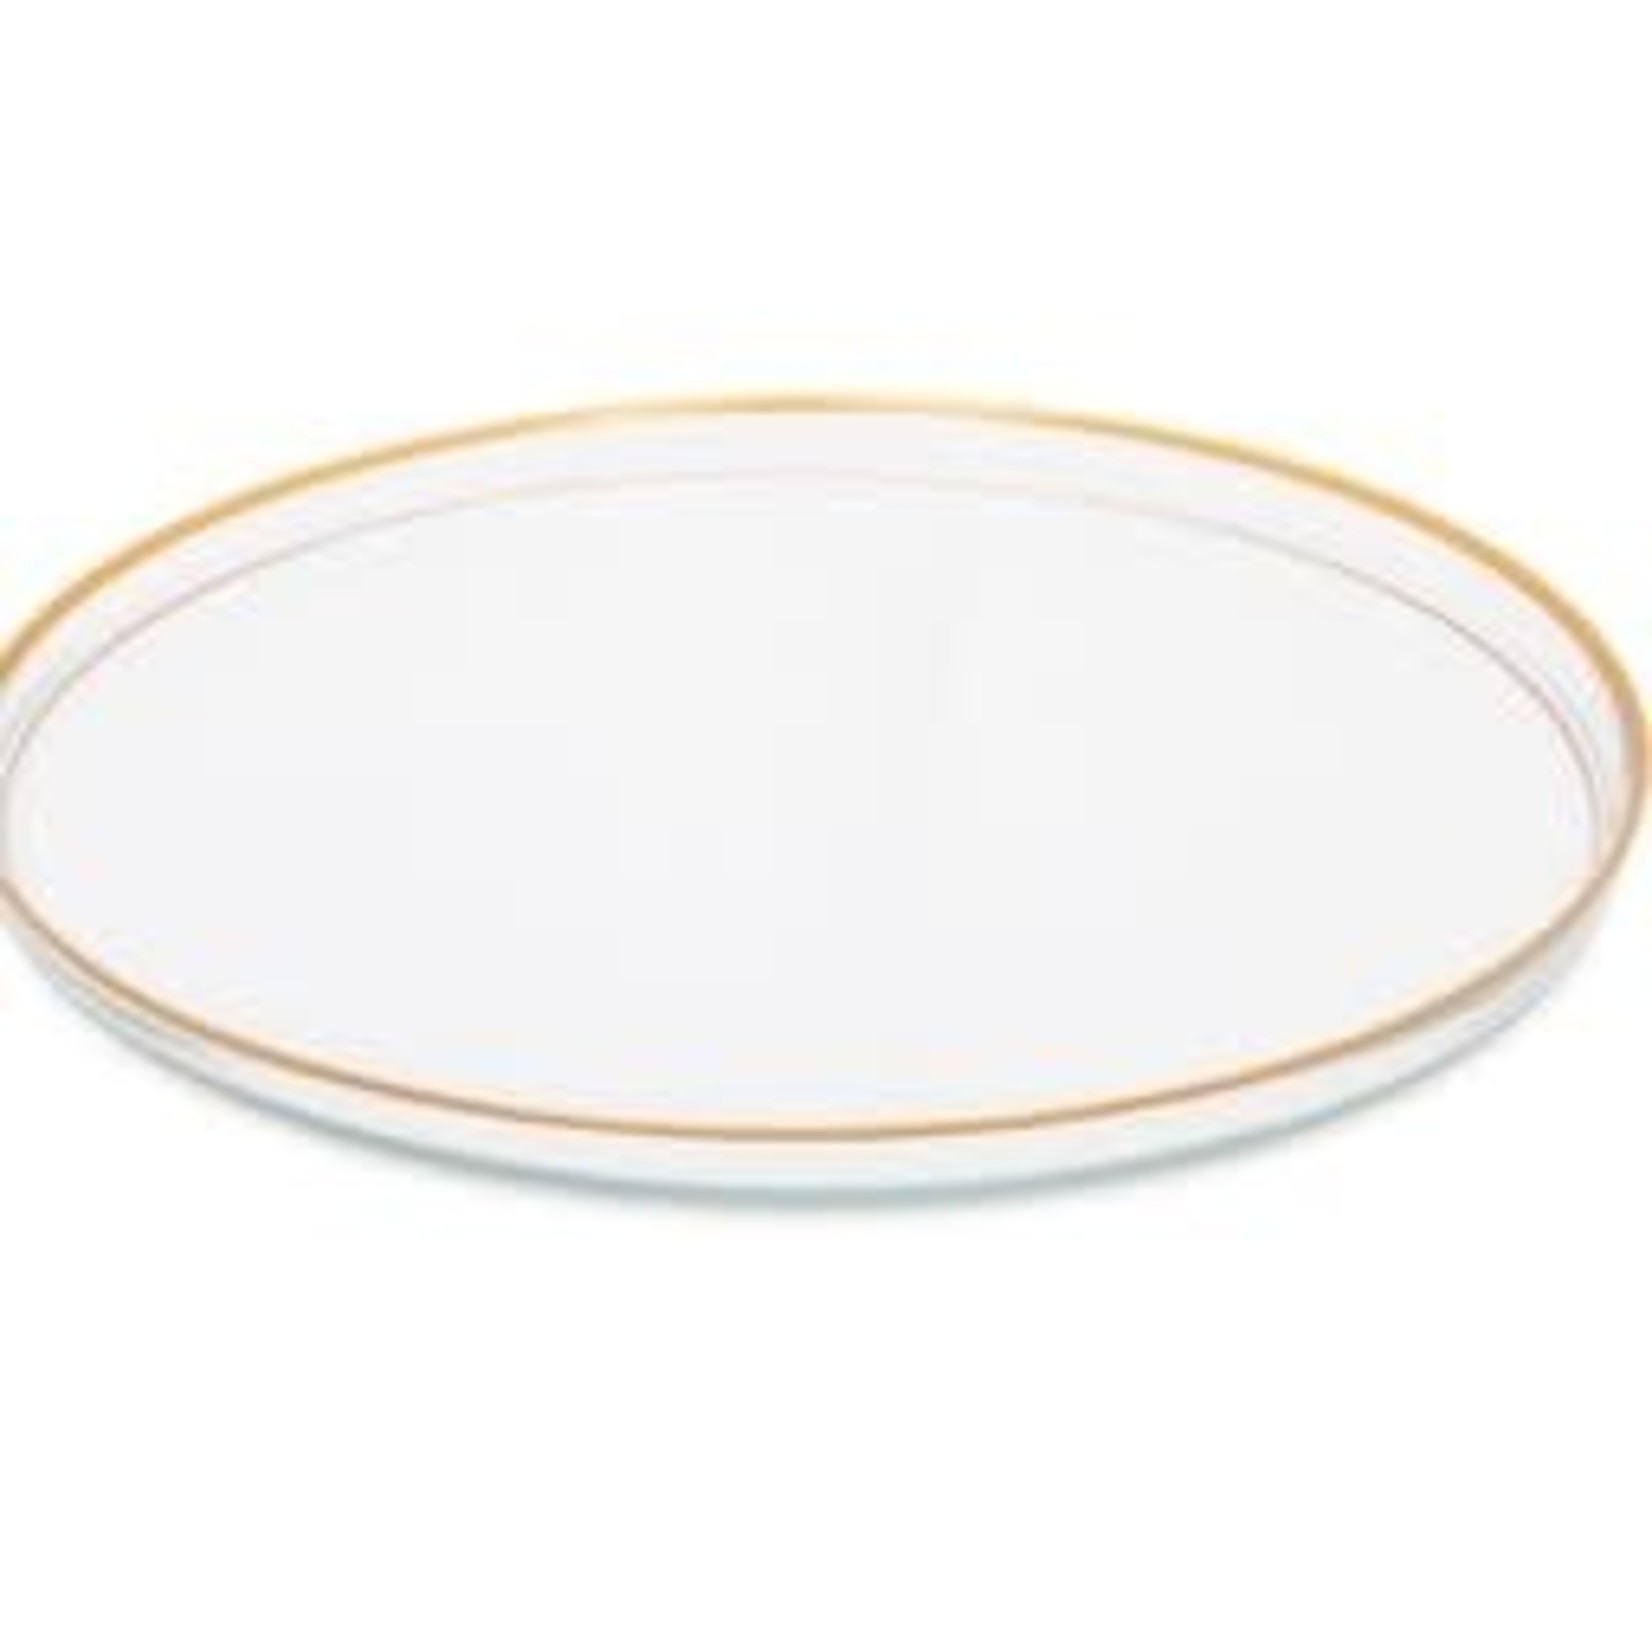 TWS CC2224  Glass Chargers with Gold Rim